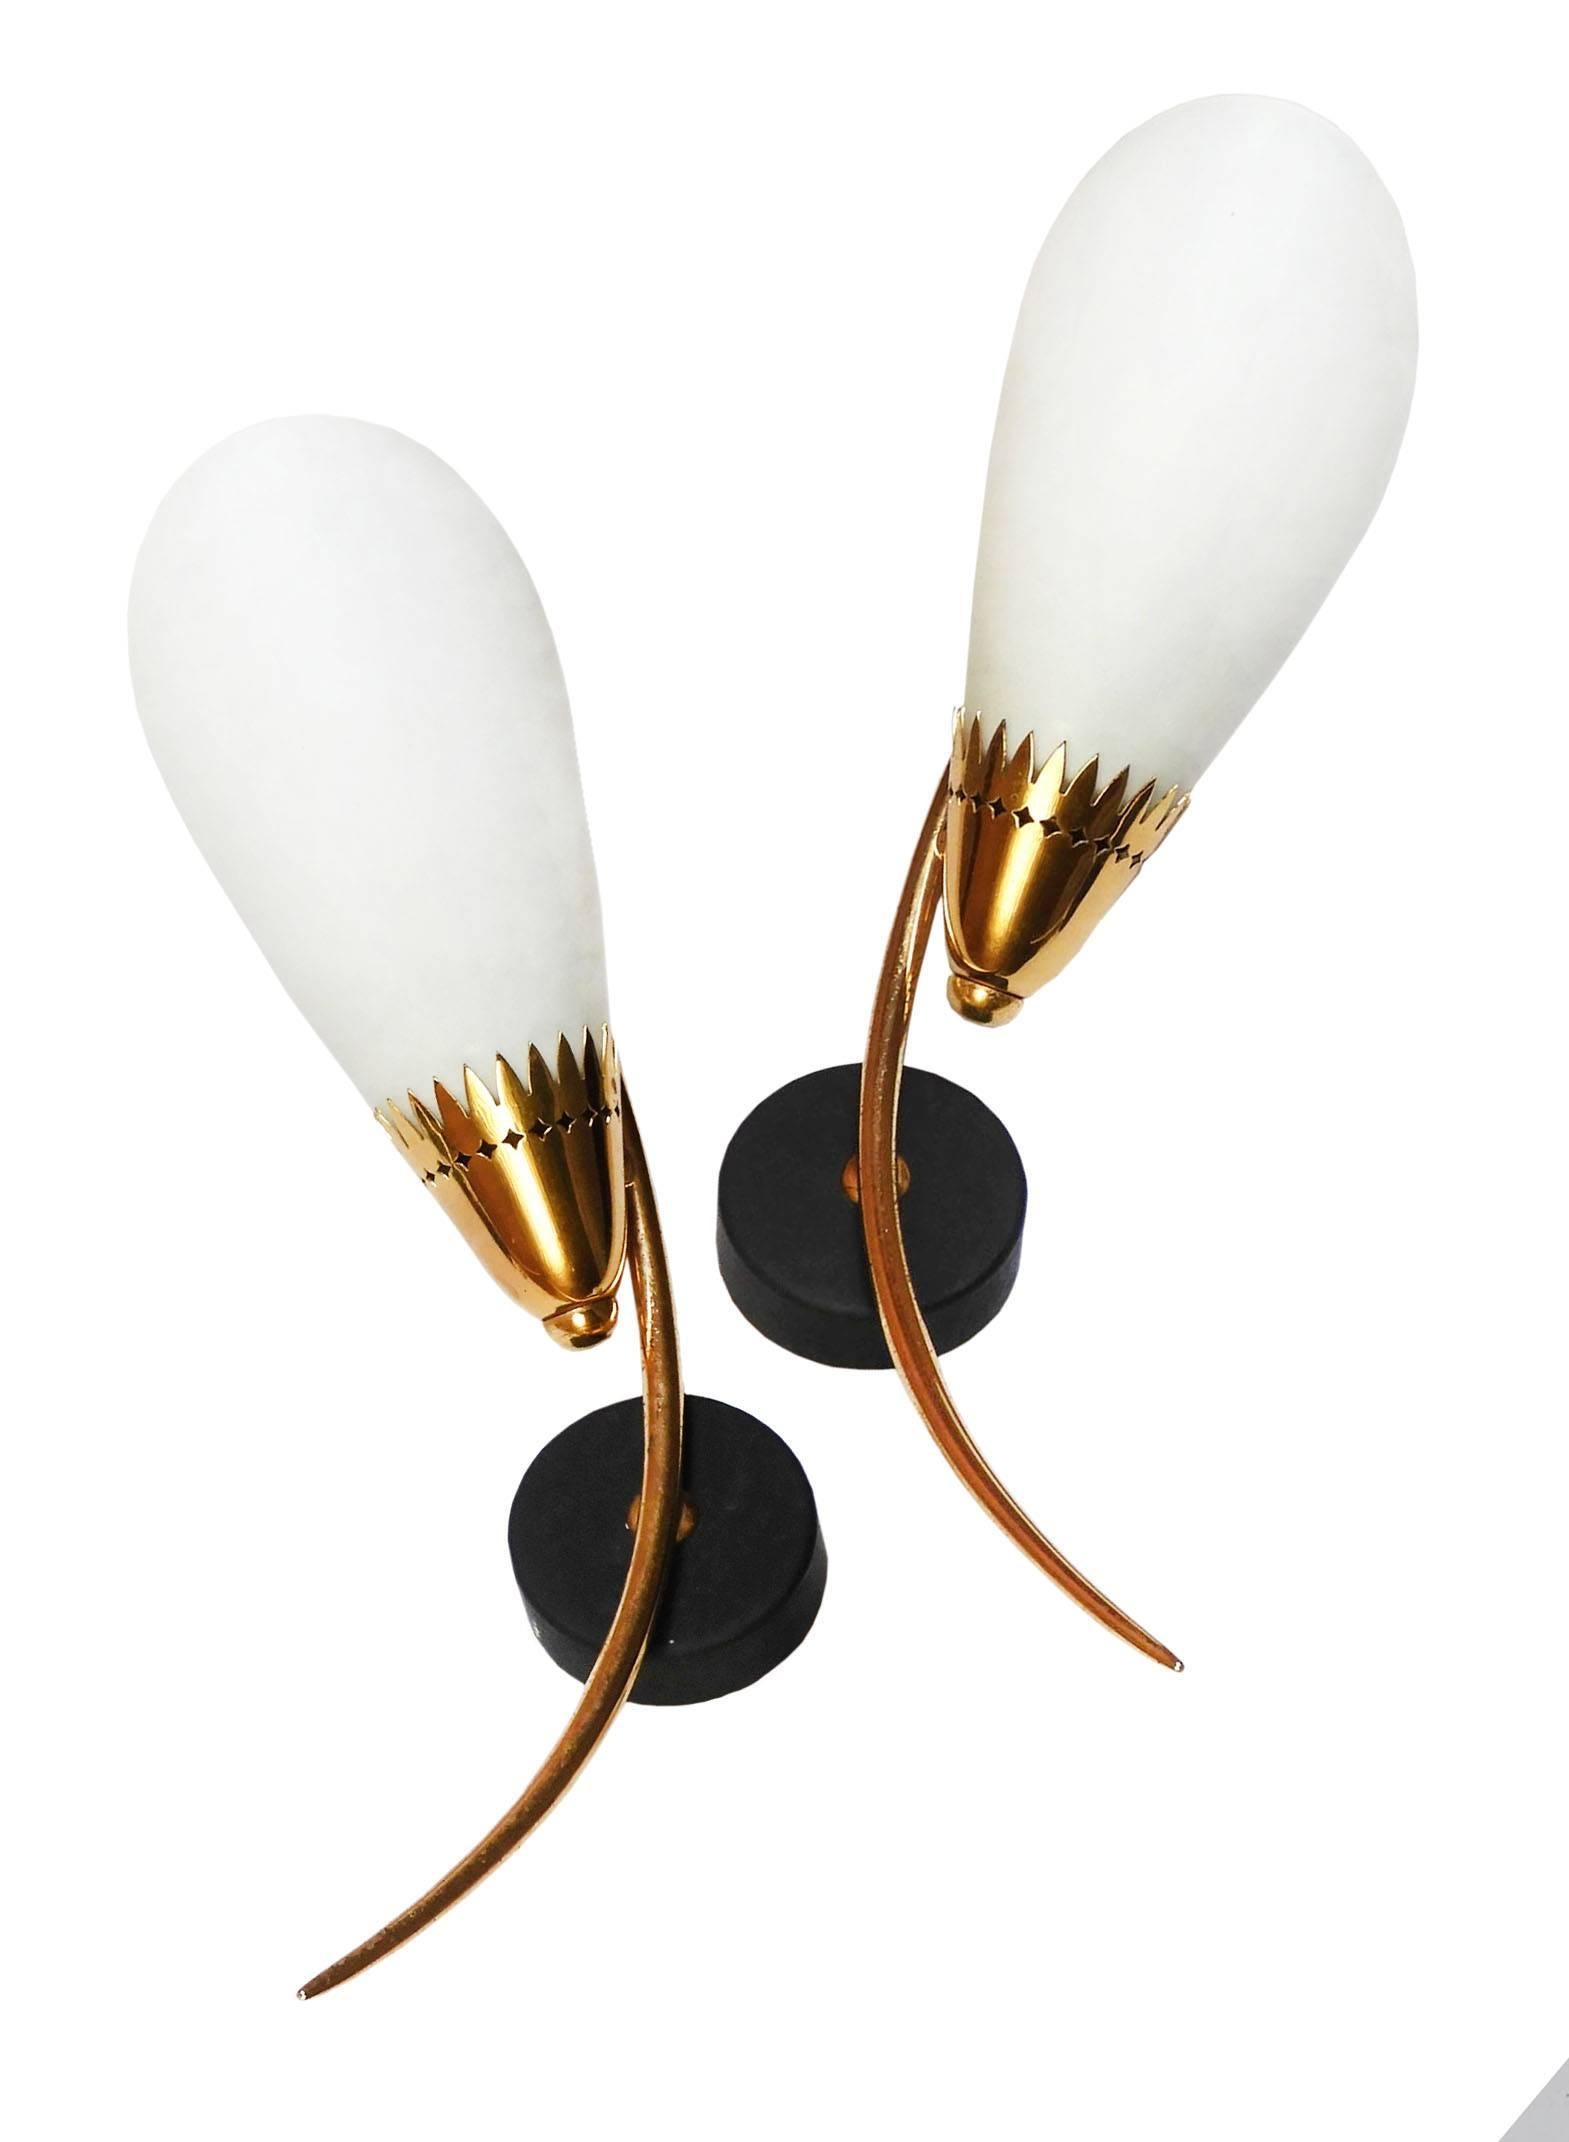 Pair of midcentury Maison Arlus wall light sconces appliques France, circa 1950-1960
Stilnovo style
Original white Opaline glass shades
with varigated brass collar details.
Good condition with only minor signs of wear for their age.
These will be